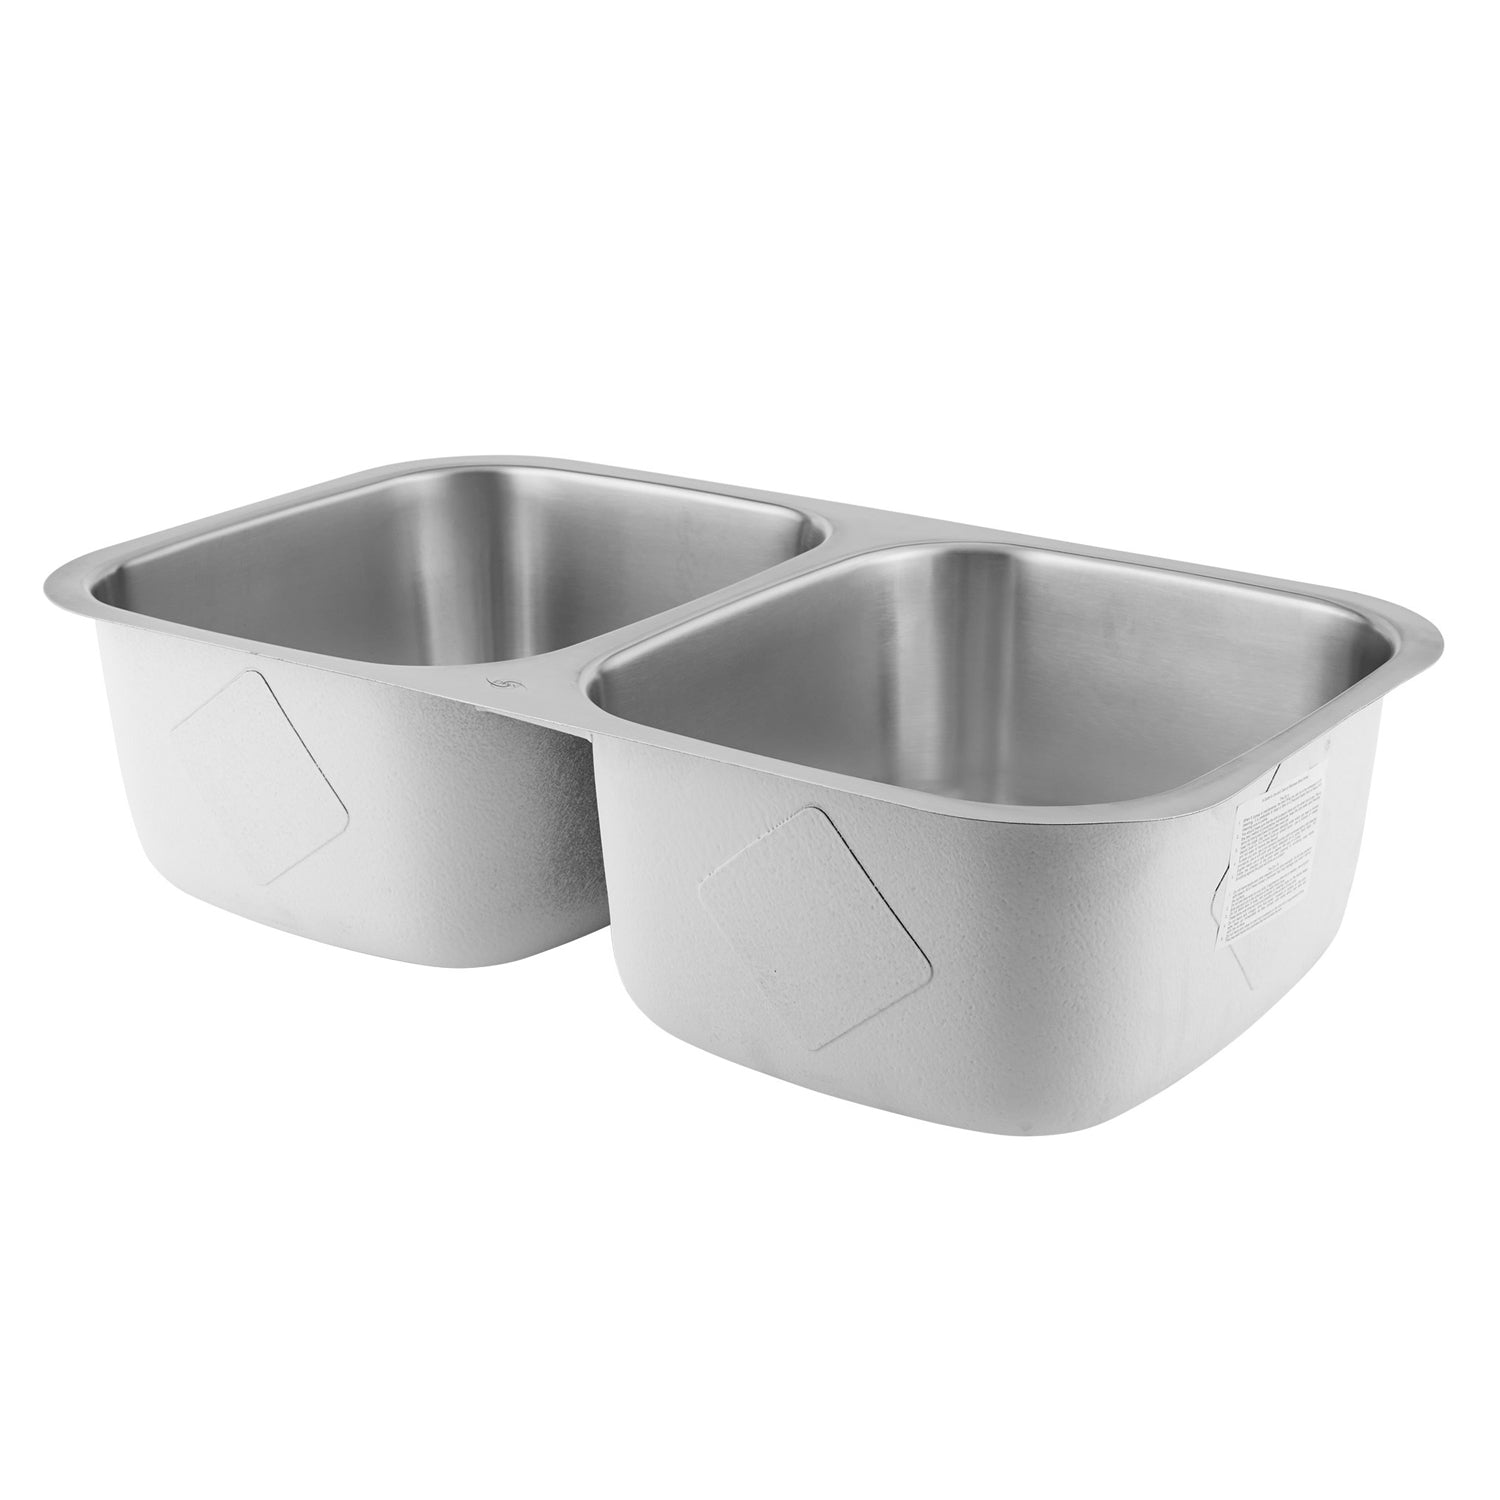 DAX 50/50 Double Bowl Undermount Kitchen Sink, 18 Gauge Stainless Steel, Brushed Finish , 32-1/4 x 18-1/2 x 9 Inches (DAX-3118)